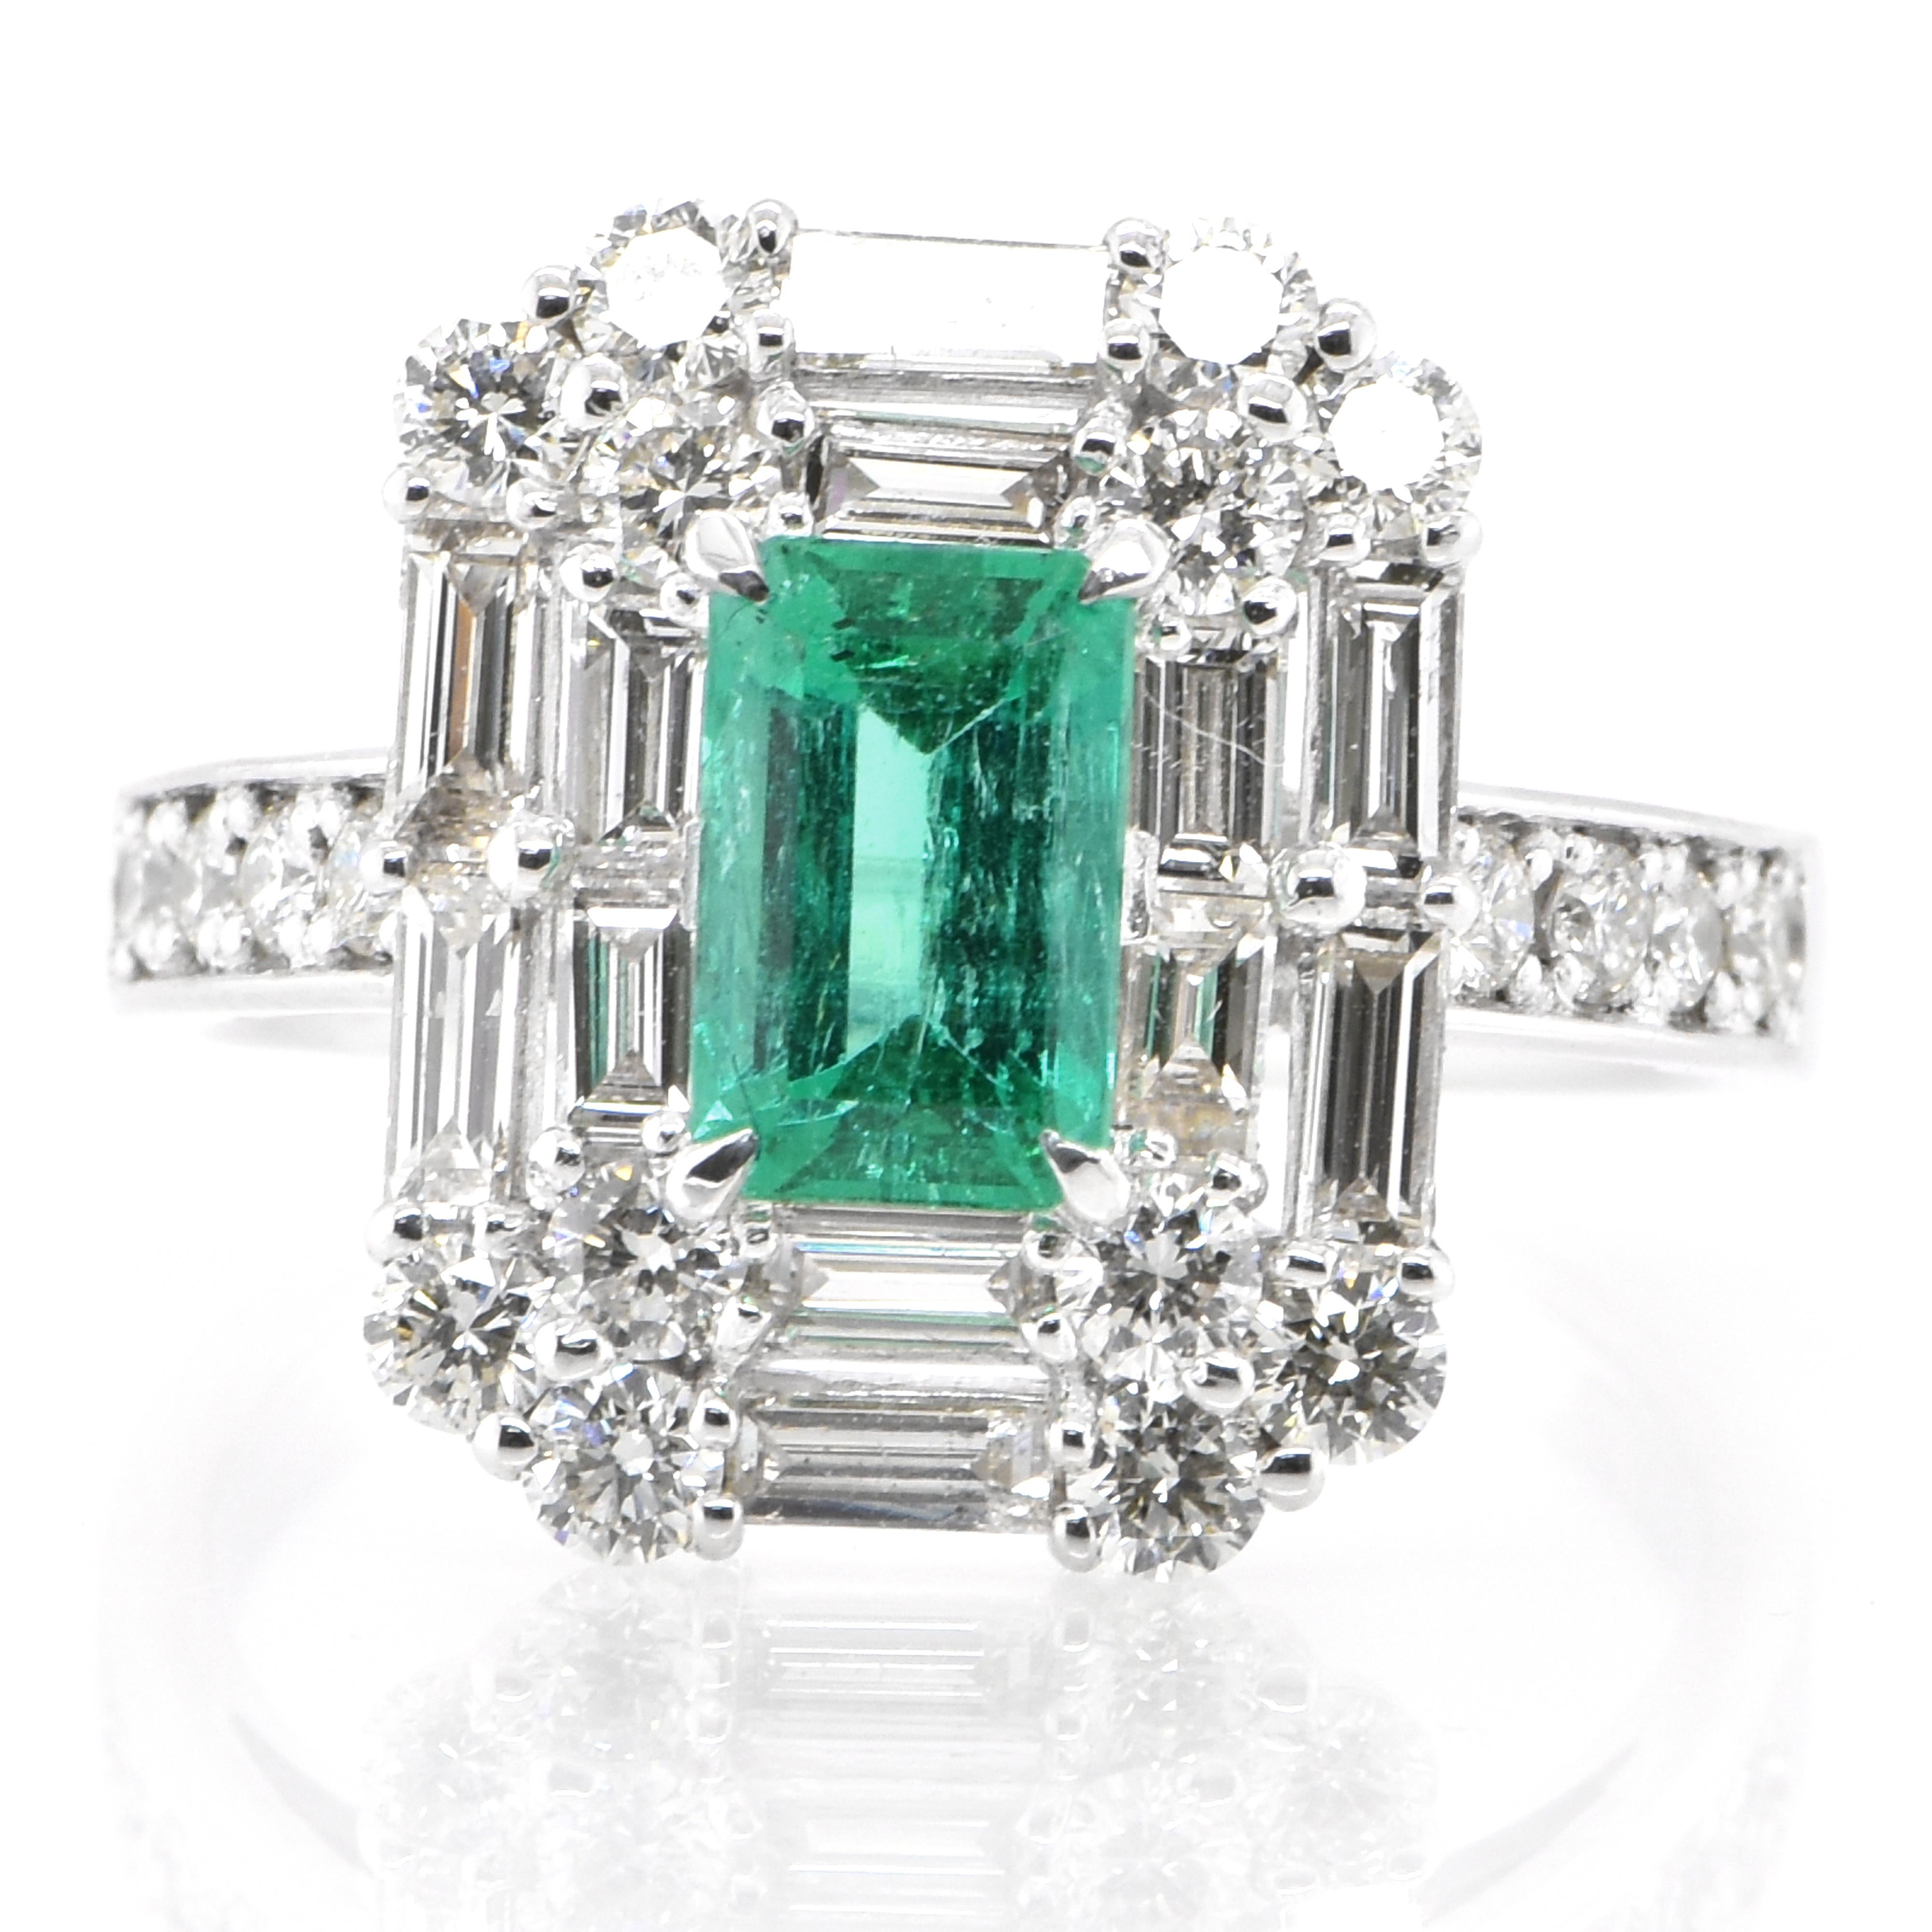 A stunning ring featuring a 1.00 Carat Natural Emerald and 1.43 Carats of Diamond Accents set in Platinum. People have admired emerald’s green for thousands of years. Emeralds have always been associated with the lushest landscapes and the richest